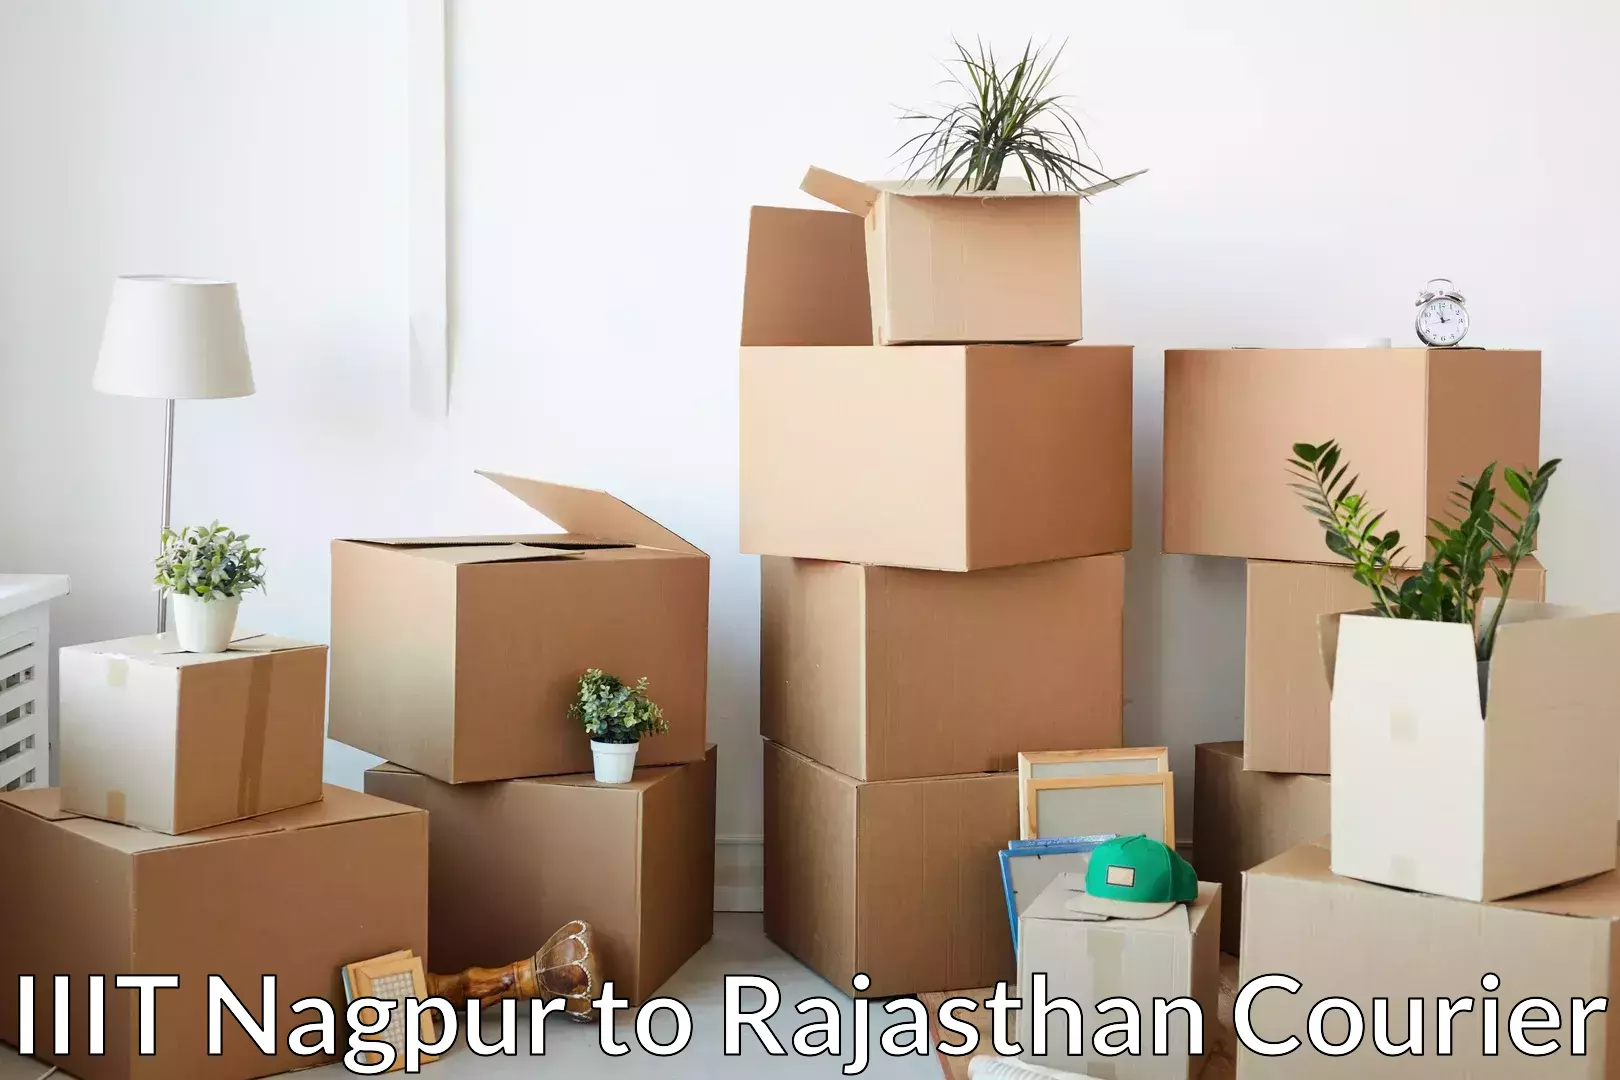 Trusted relocation experts IIIT Nagpur to Rajasthan